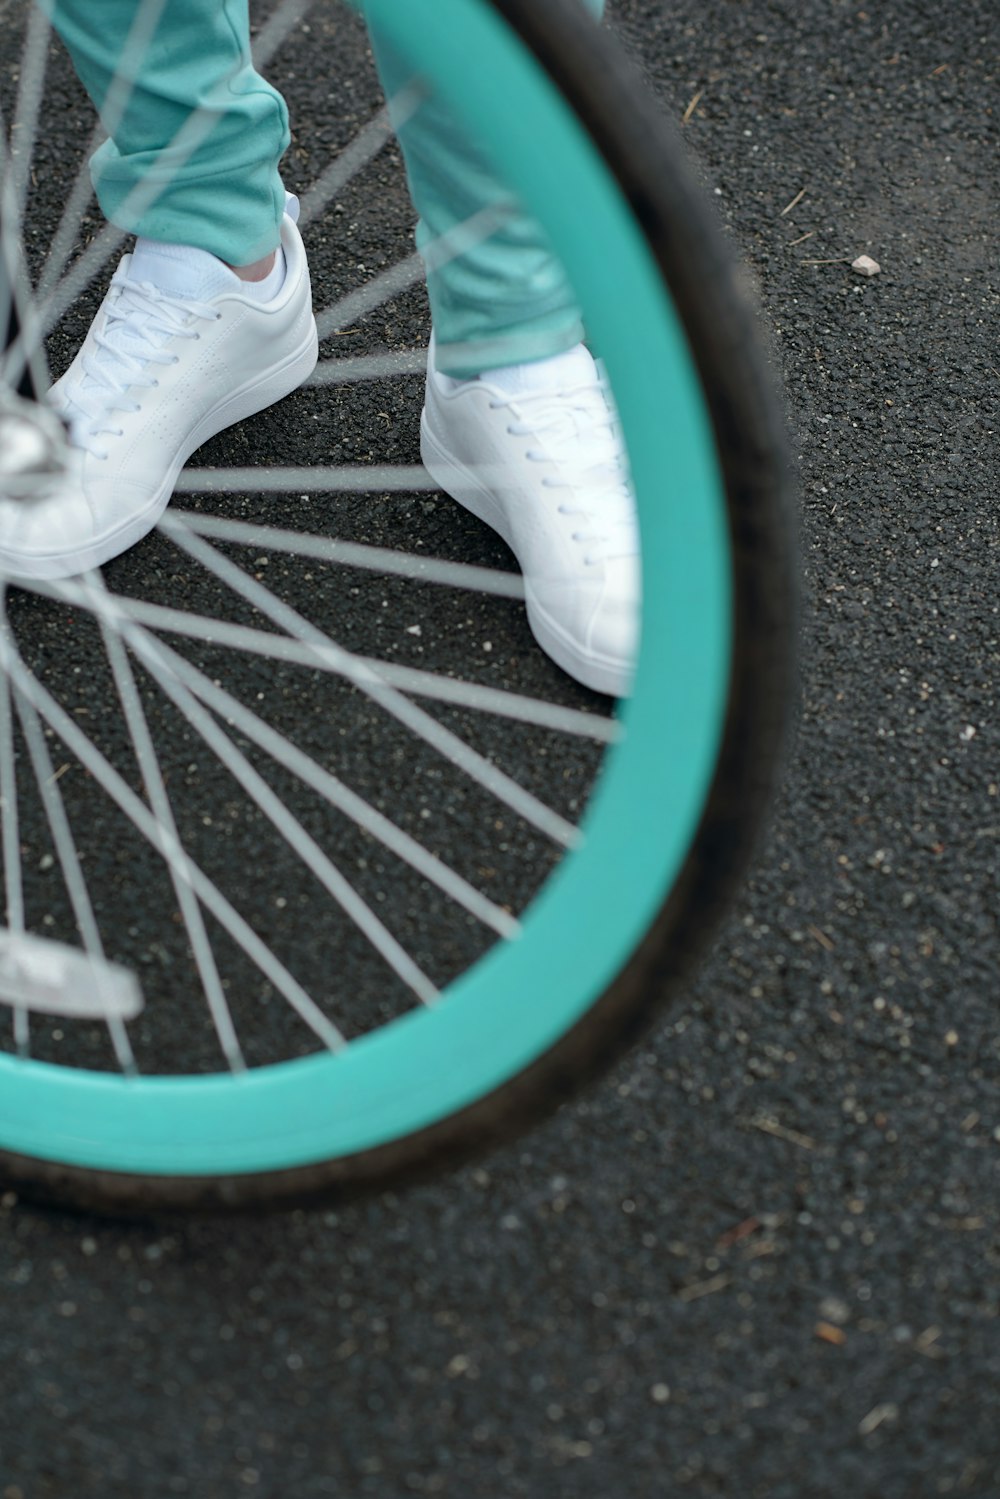 a close up of a person's feet on a bicycle wheel